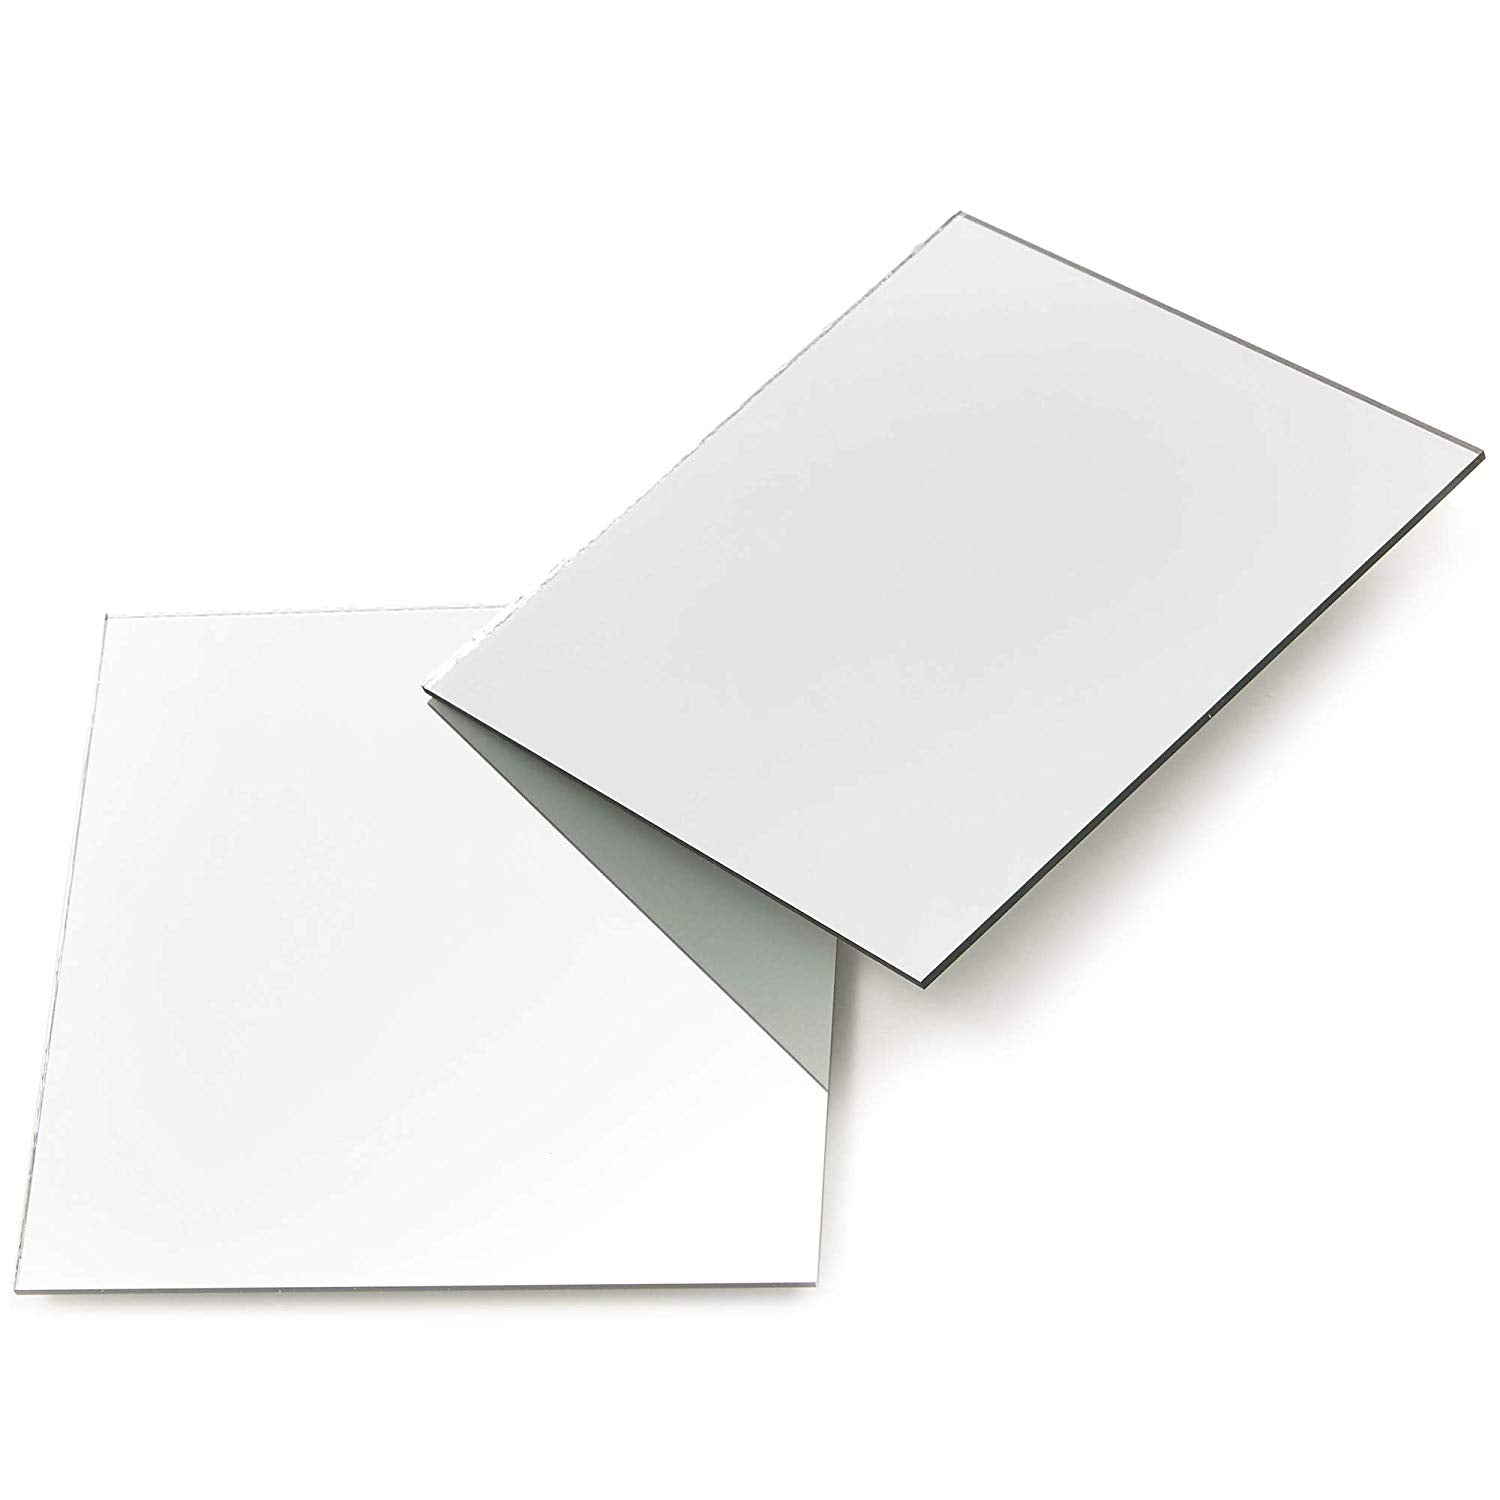 Bright 50 Pack Square Glass Mirror Tiles 4 Inch Panels Crafts Centerpieces  Home